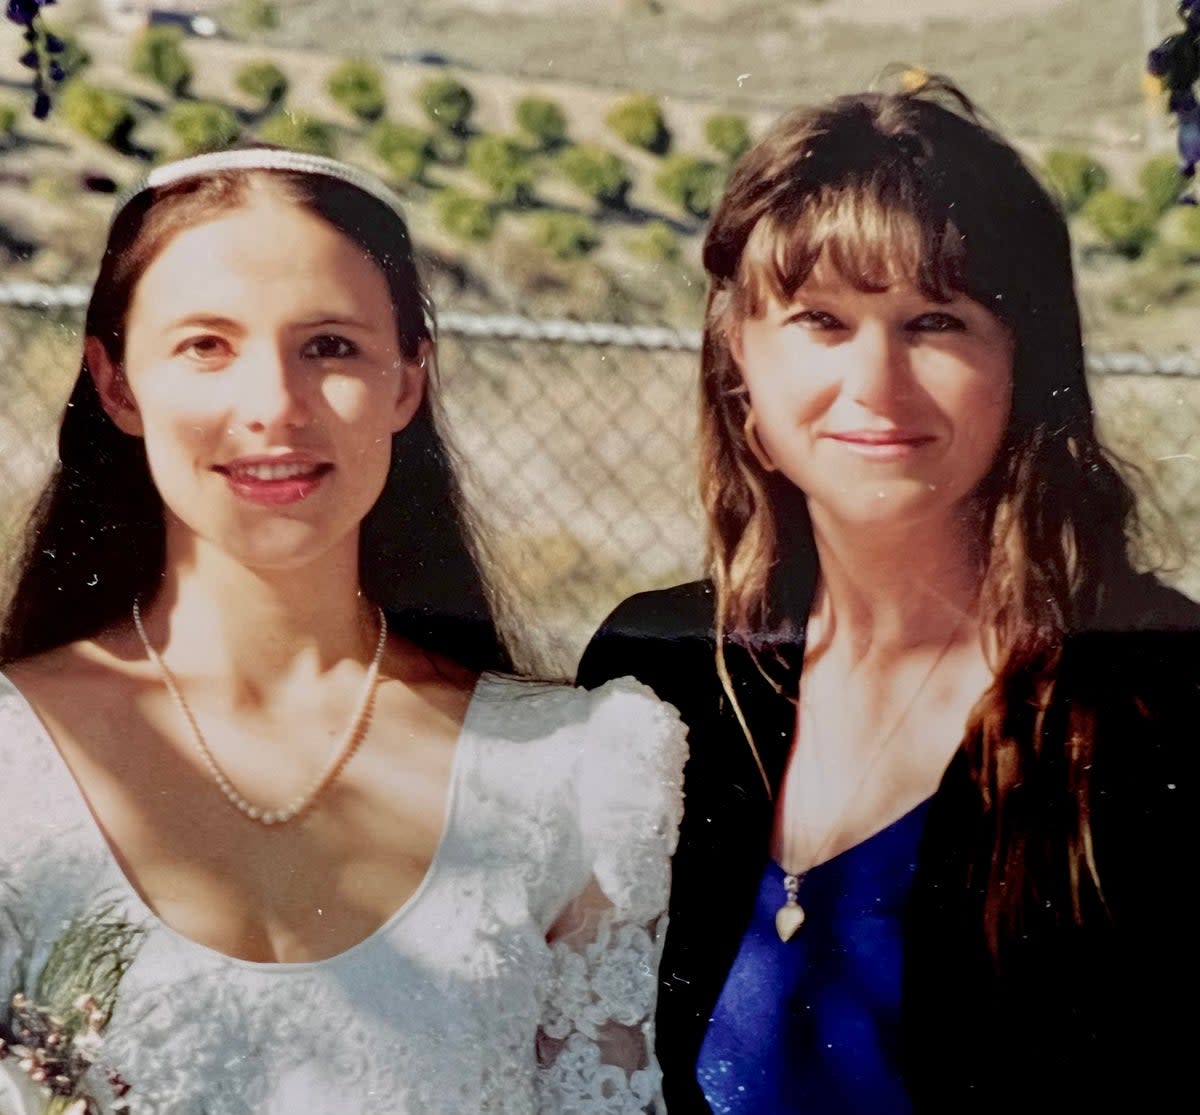 Francesca Williams, left, with her mother Marianna Benedict-Bacilla on her wedding day. Williams was killed in a home invasion on her farm in Ecuador on 20 May (Courtesy of Marianna Benedict-Bacilla)